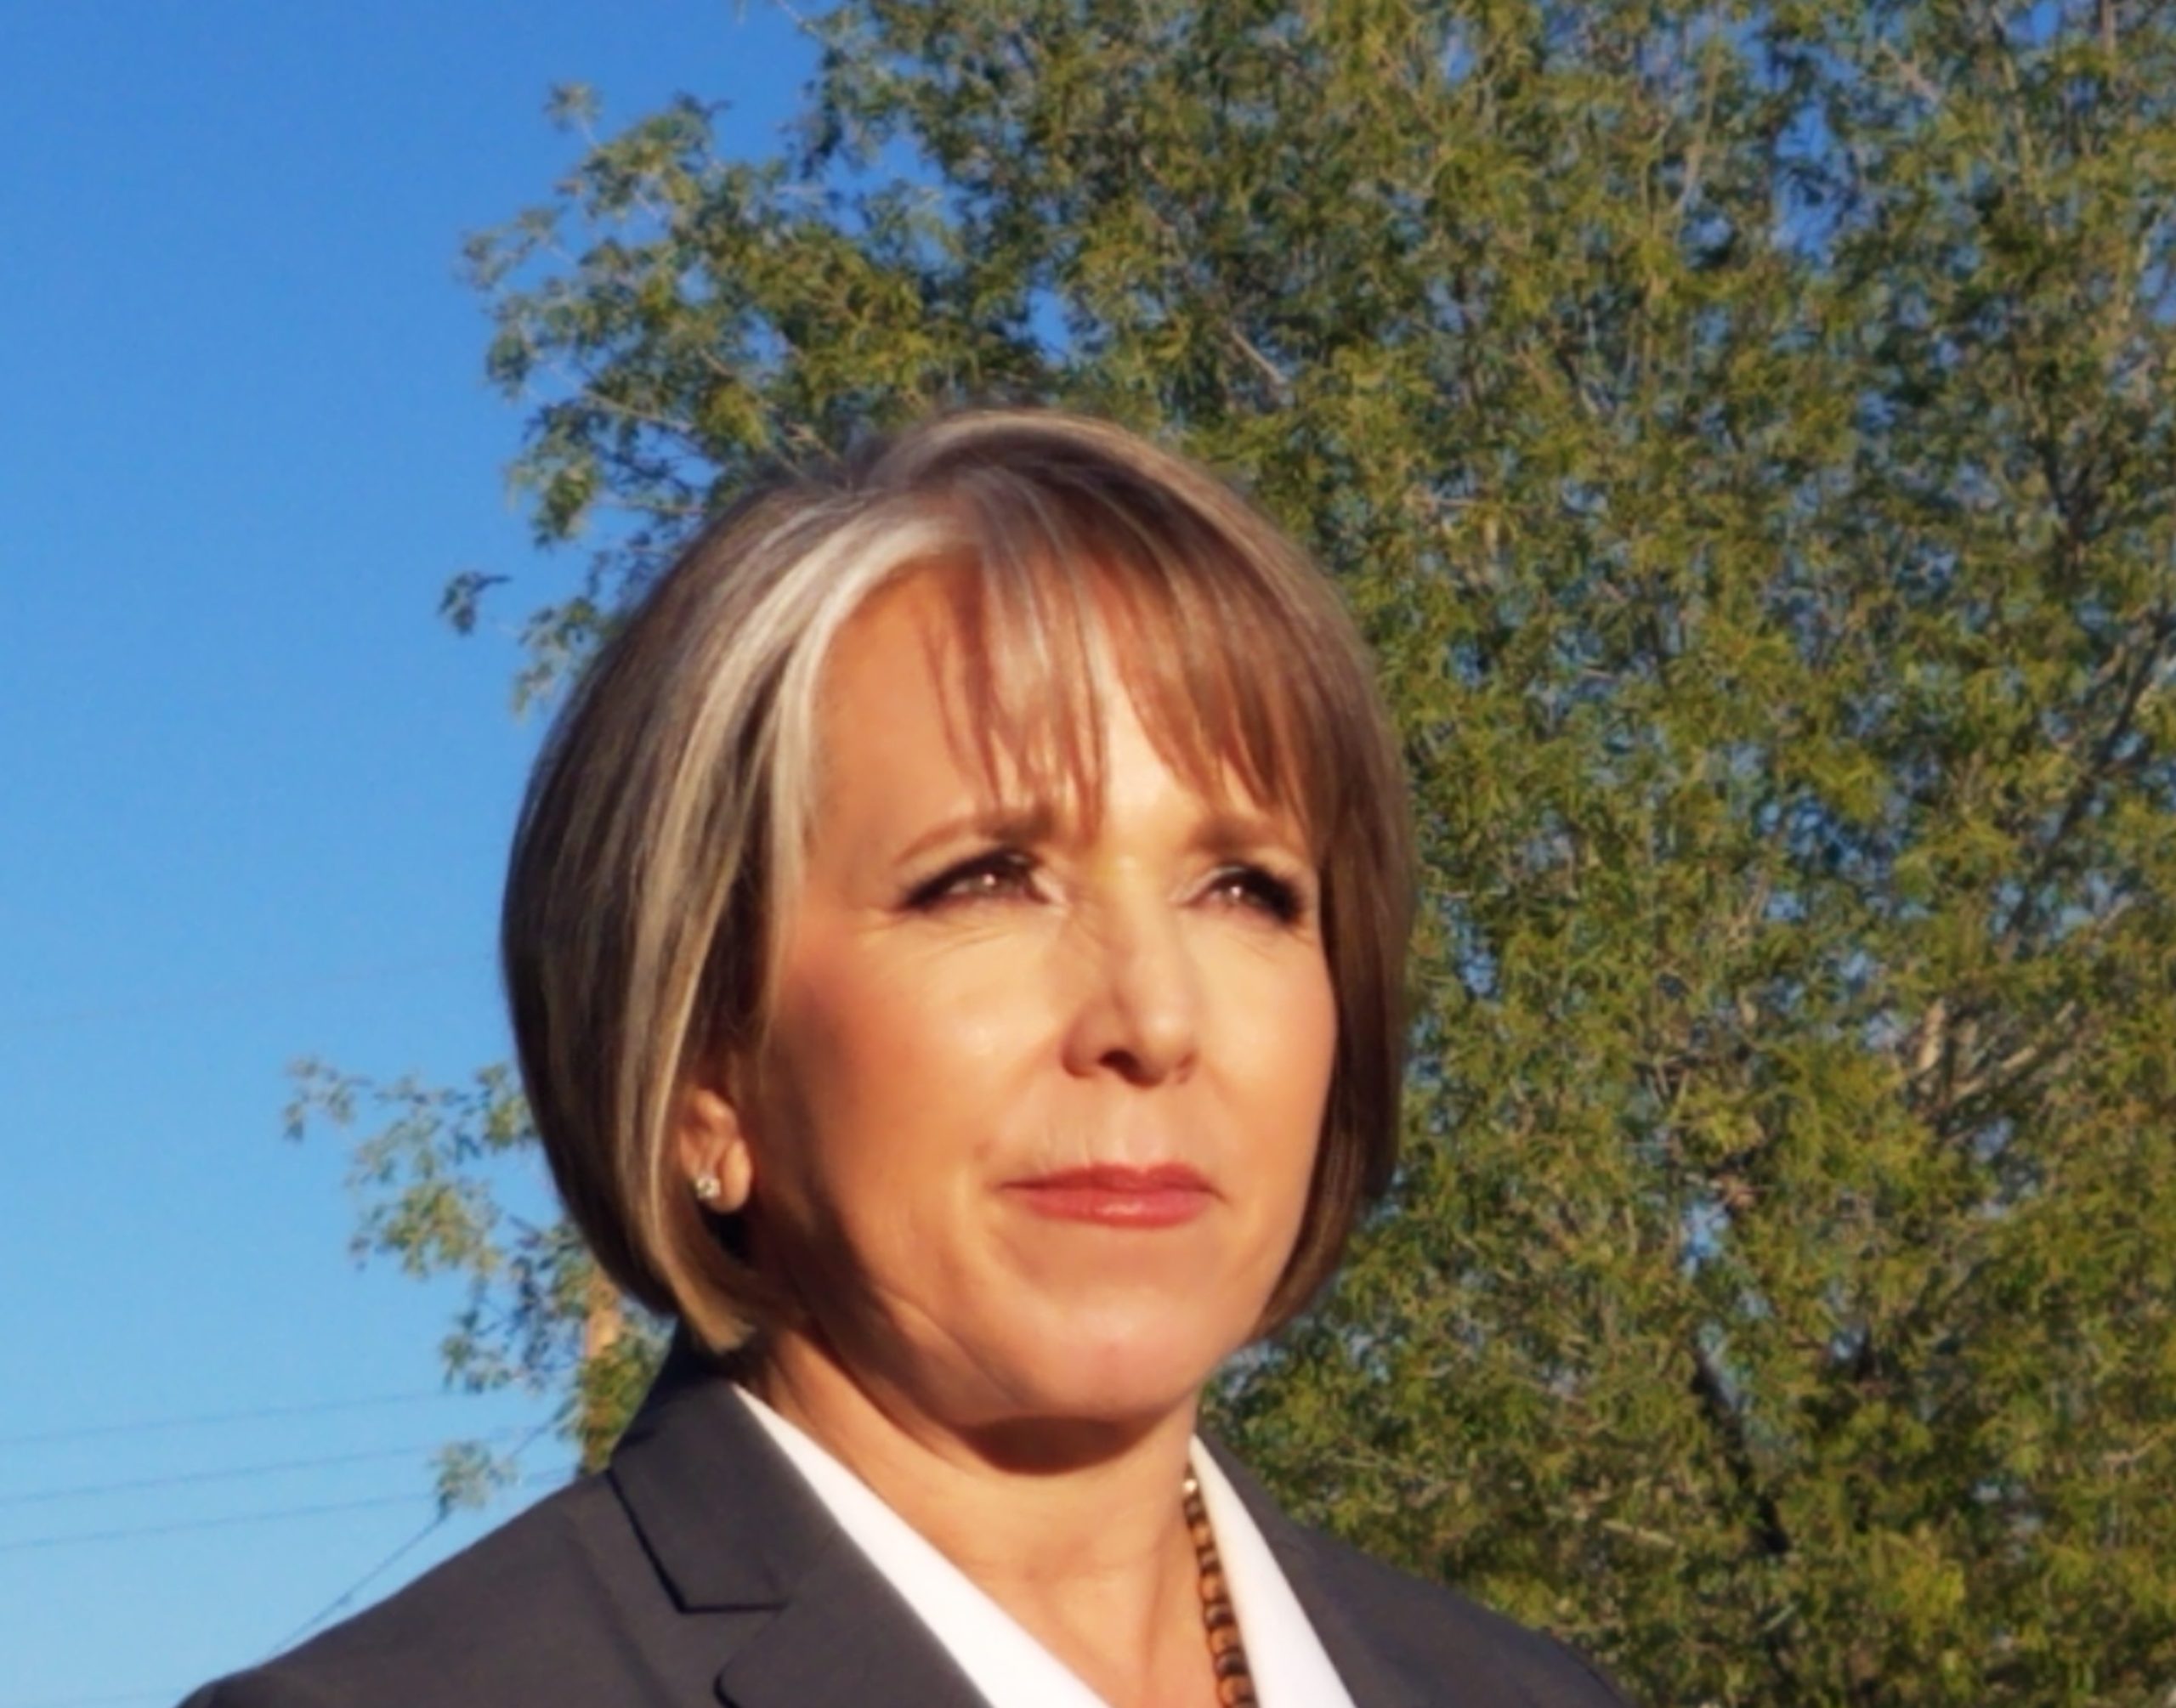 Lujan Grisham is New Mexico’s next governor